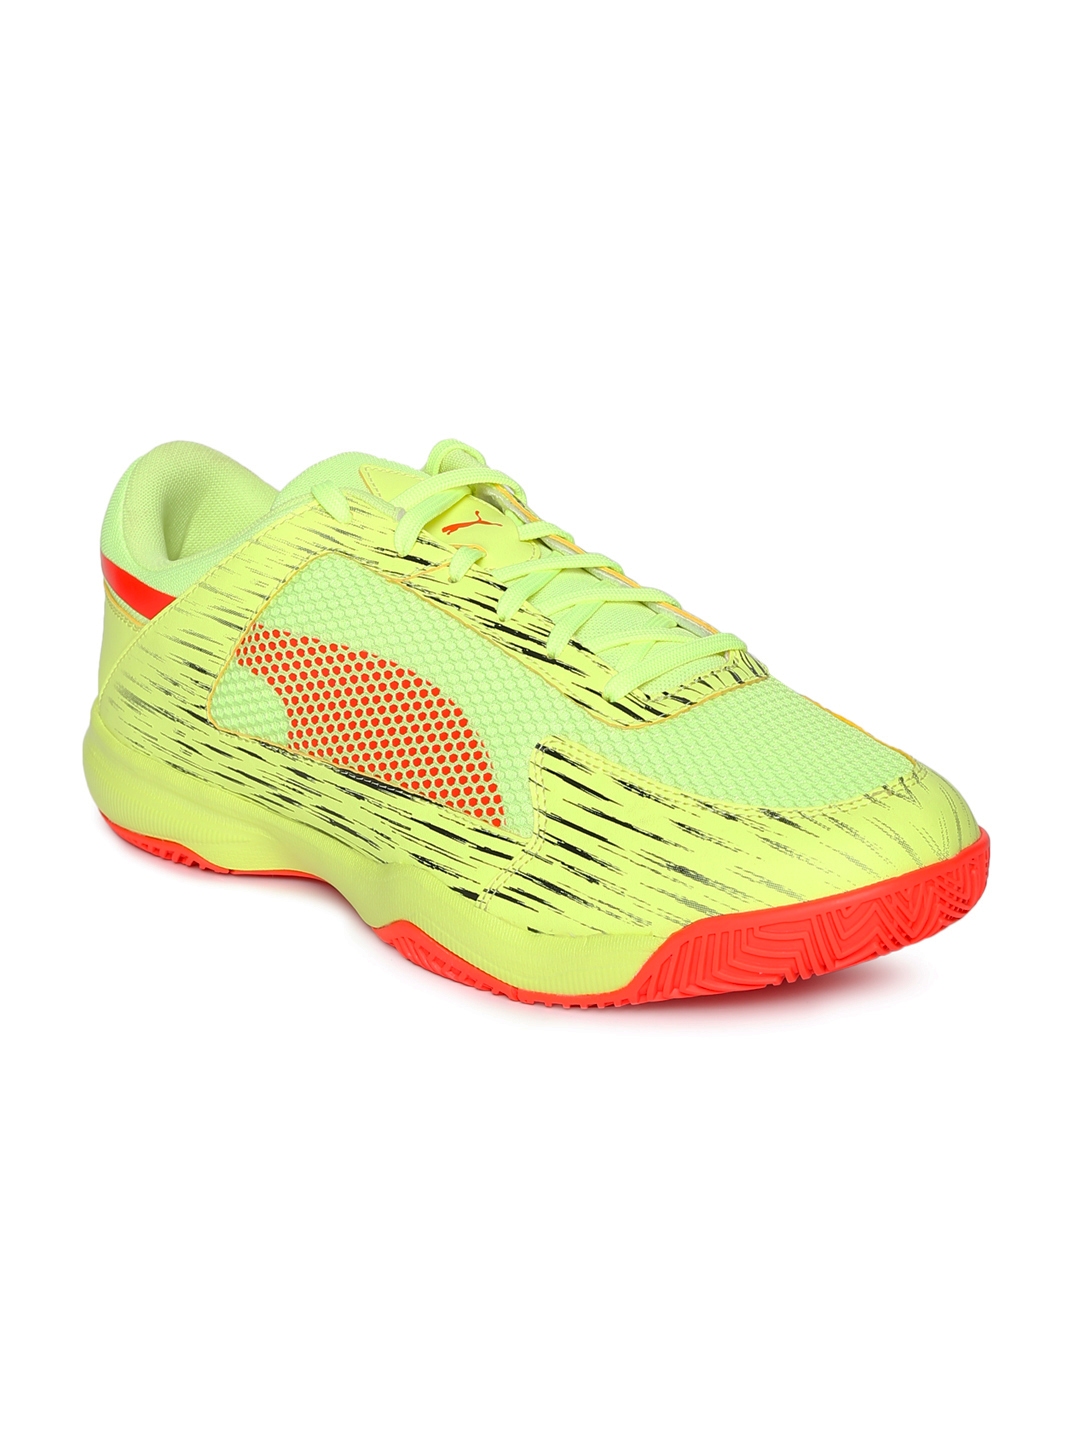 Buy Puma Yellow Indoor Netfit EURO 5 Shoes - Sports Shoes for Men 6702930